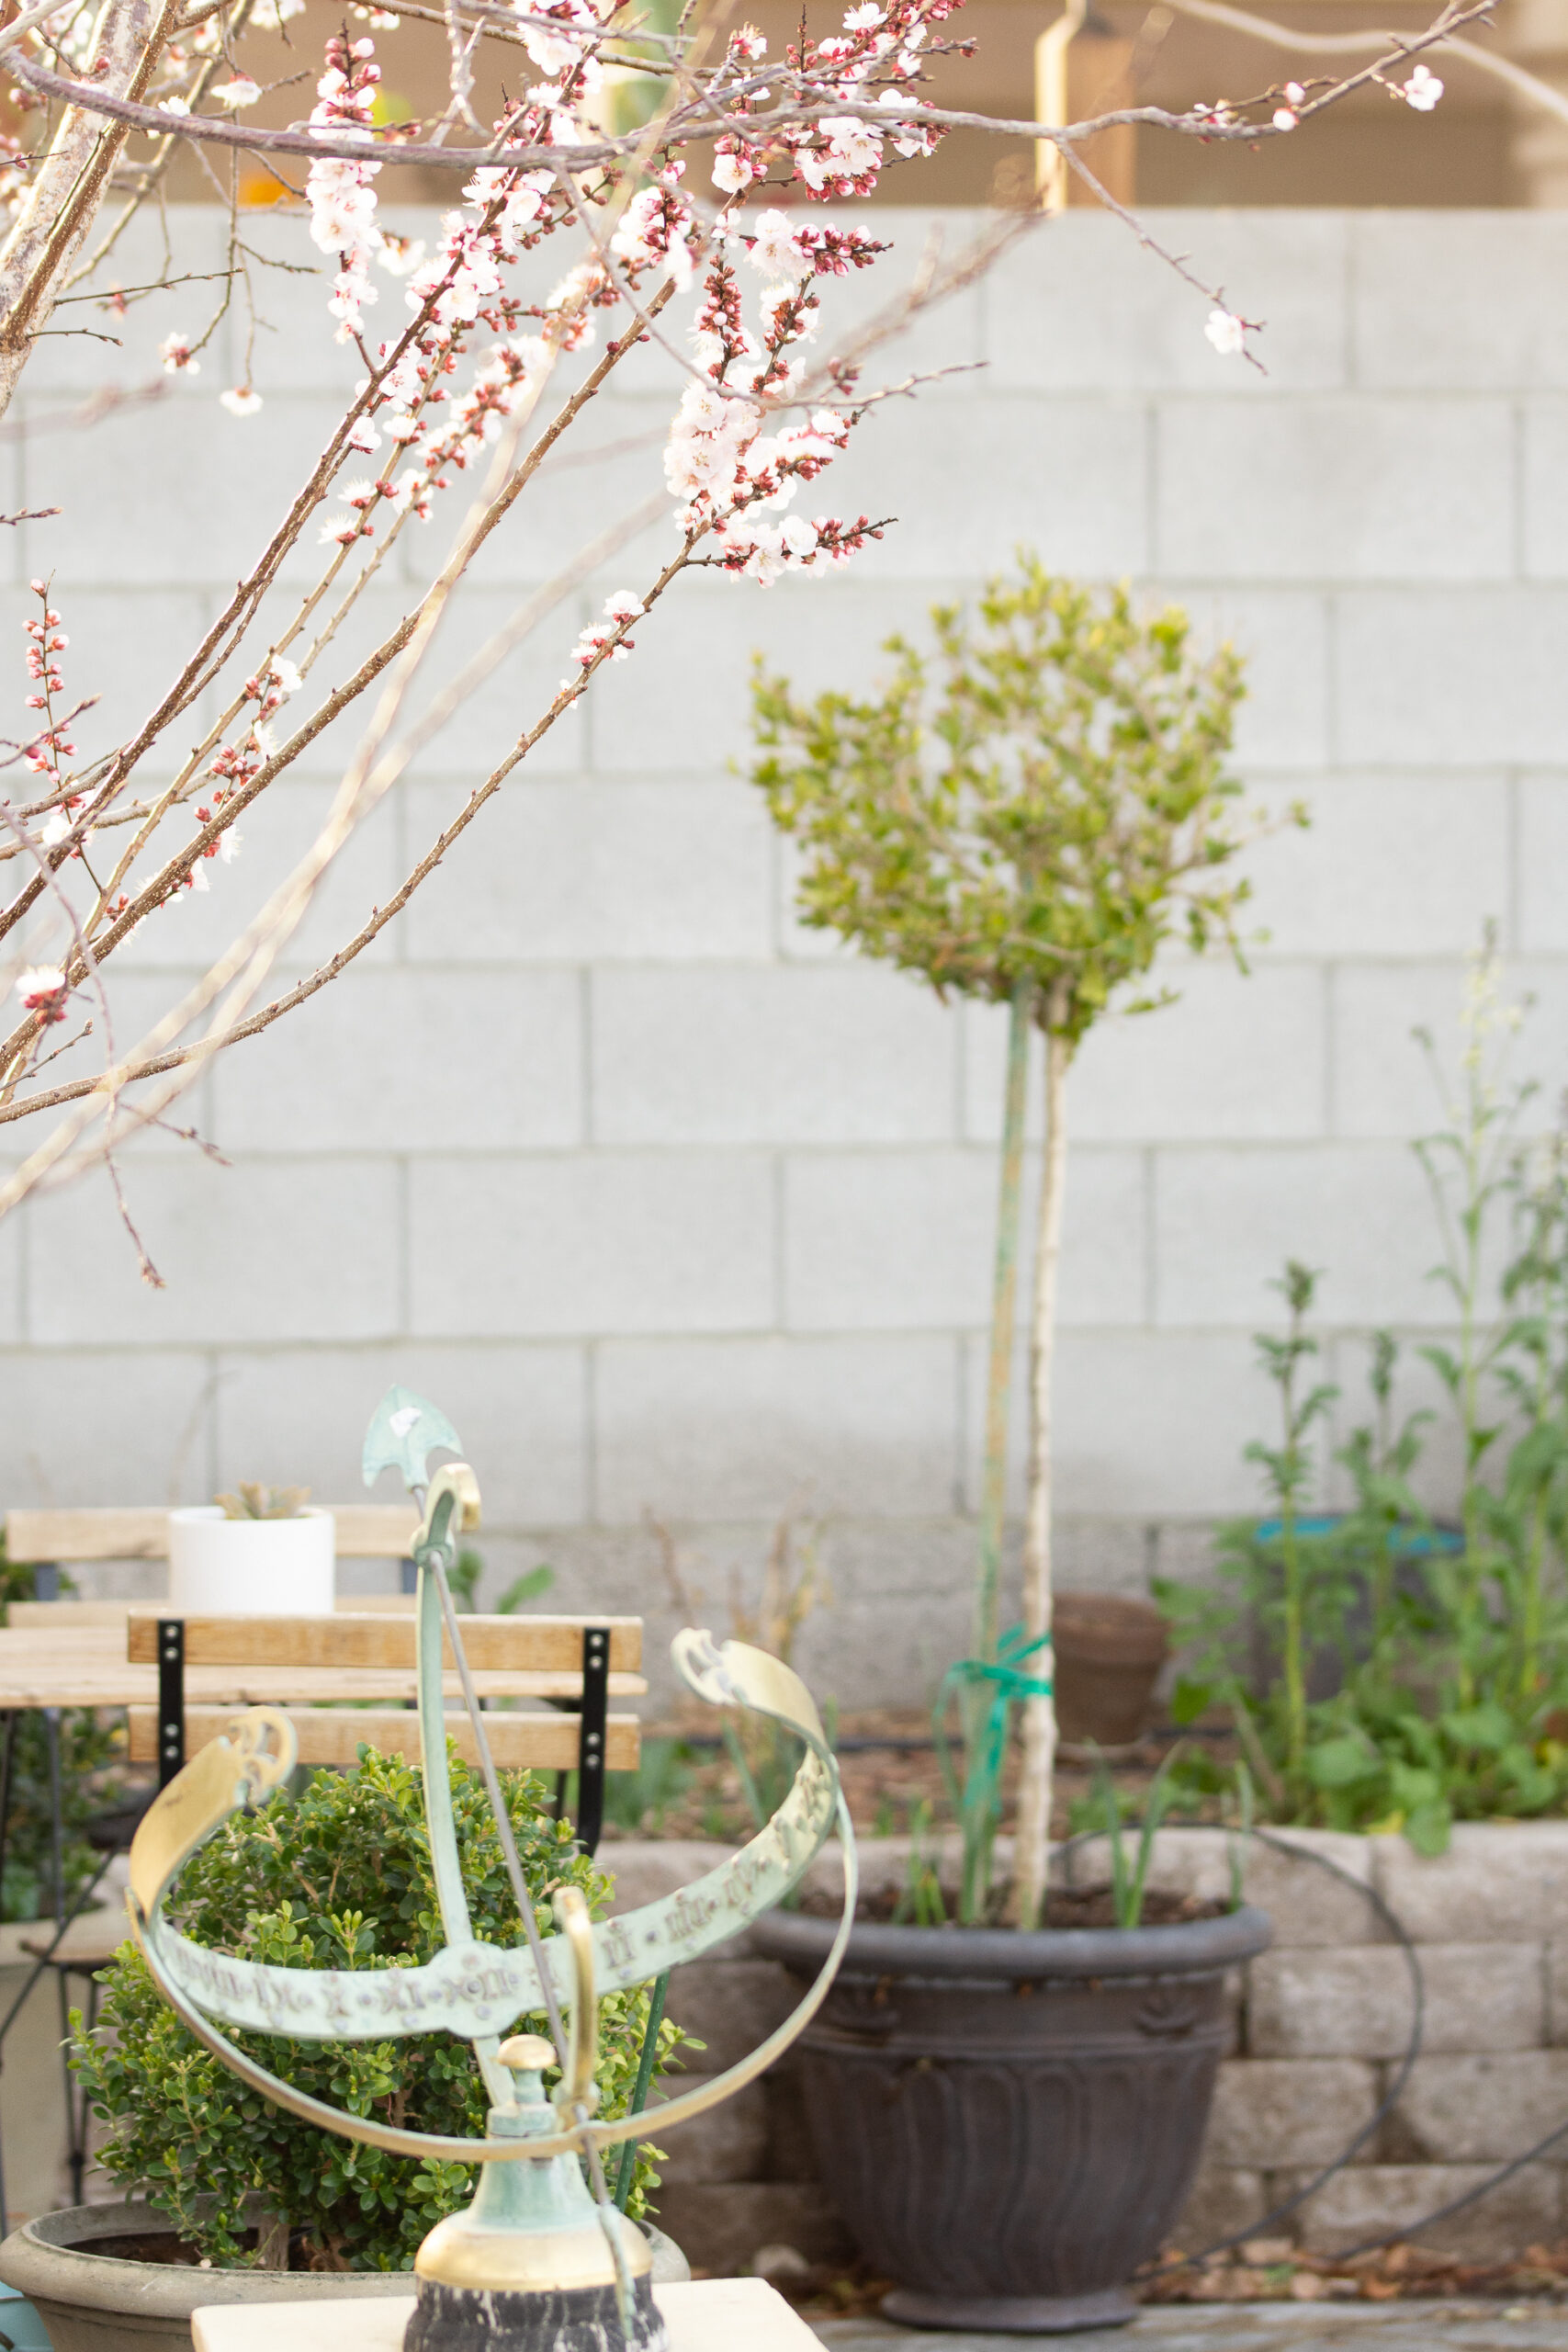 https://theprudenthomemaker.com/wp-content/uploads/2023/02/February-Courtyard-with-Blossoms-The-Prudent-Homemaker-scaled.jpg